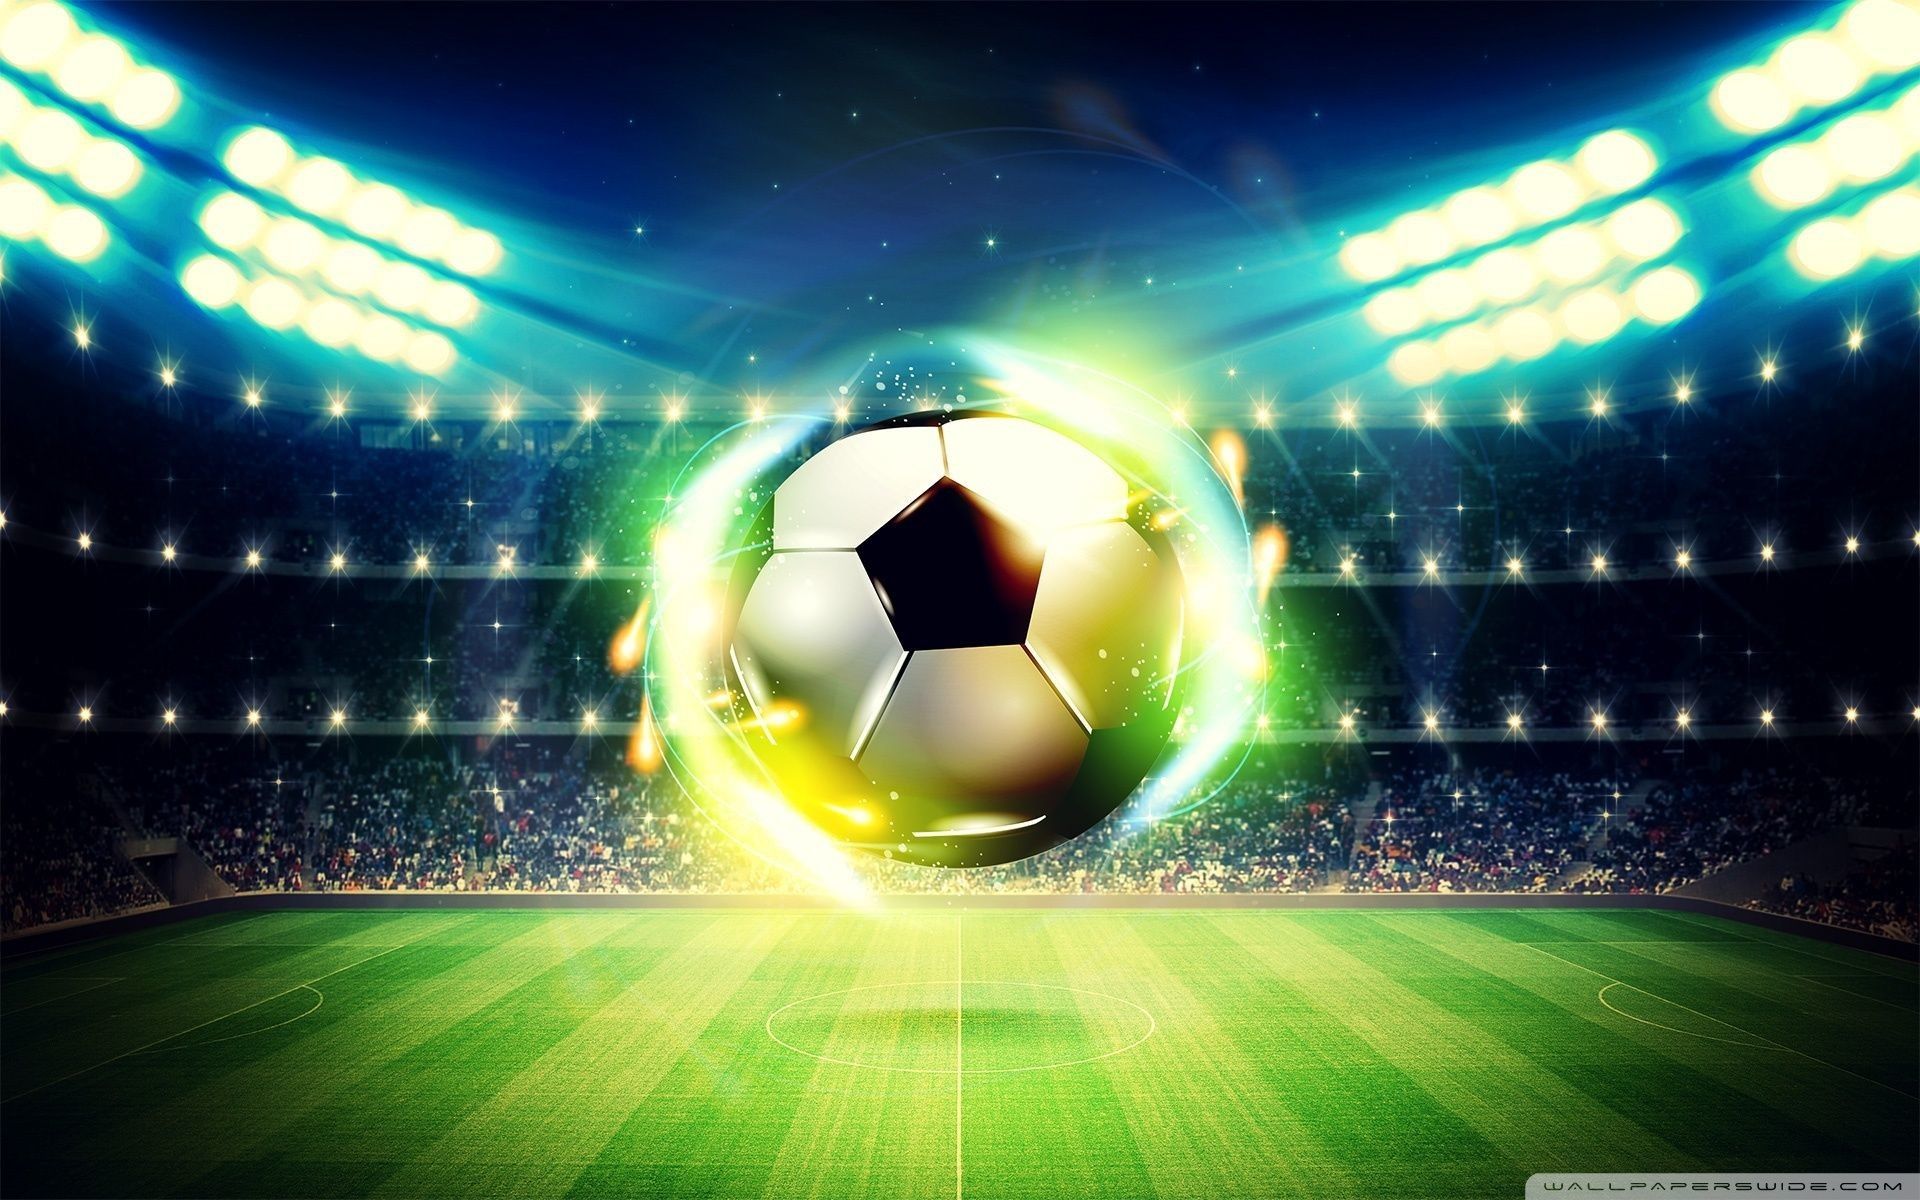 Soccer ball in the air with stadium lights - Soccer